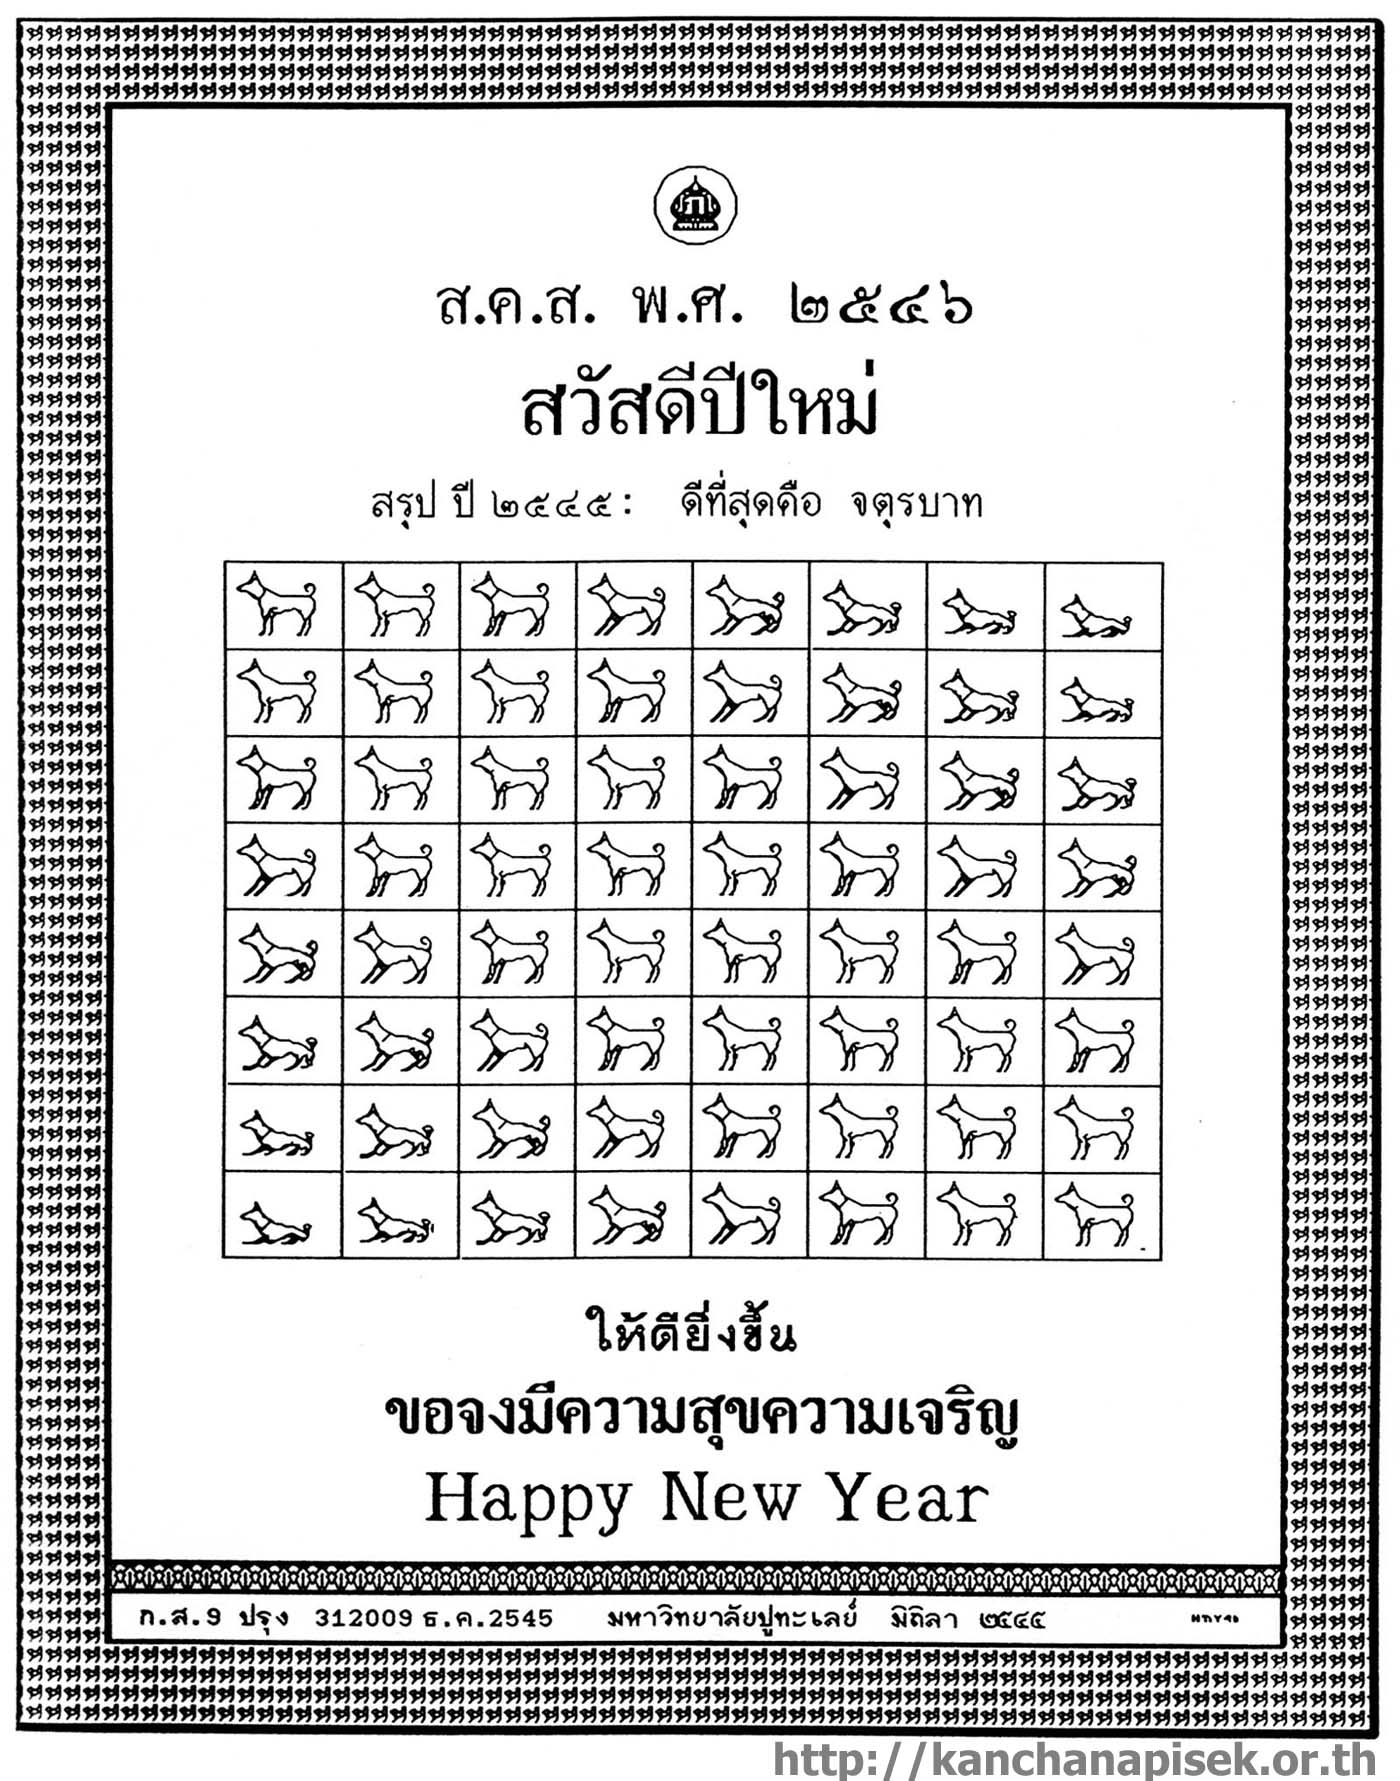 the new year card, 1400 pixels, 337KB.